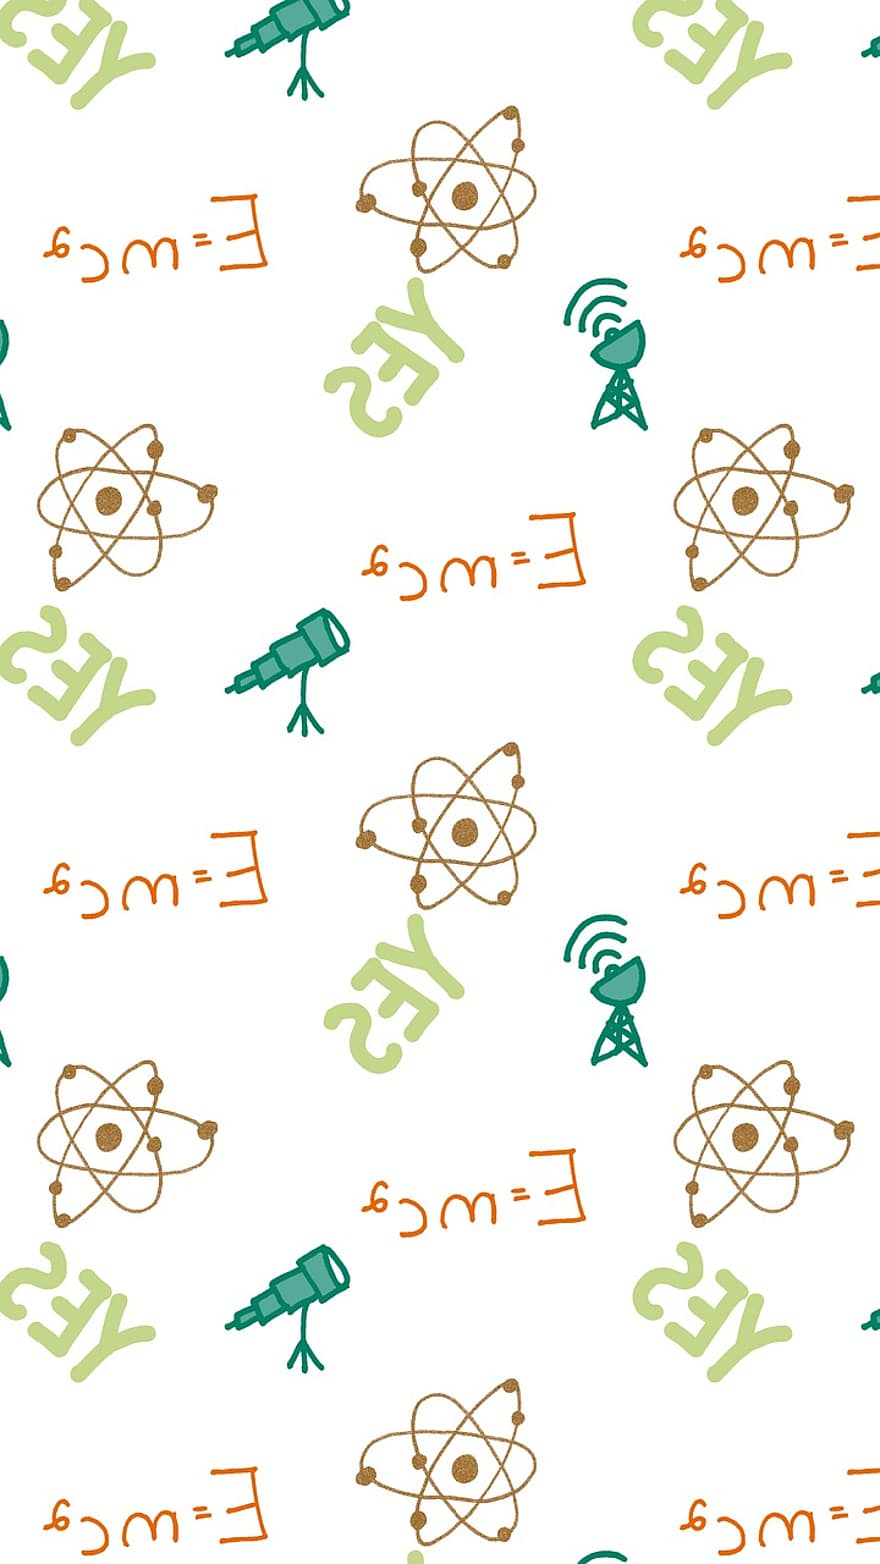 Knowledge, Data, Science Doodles, Yes, Atom, Nuclear, Electron, Physics, Particles, Telescope, Transmission Tower